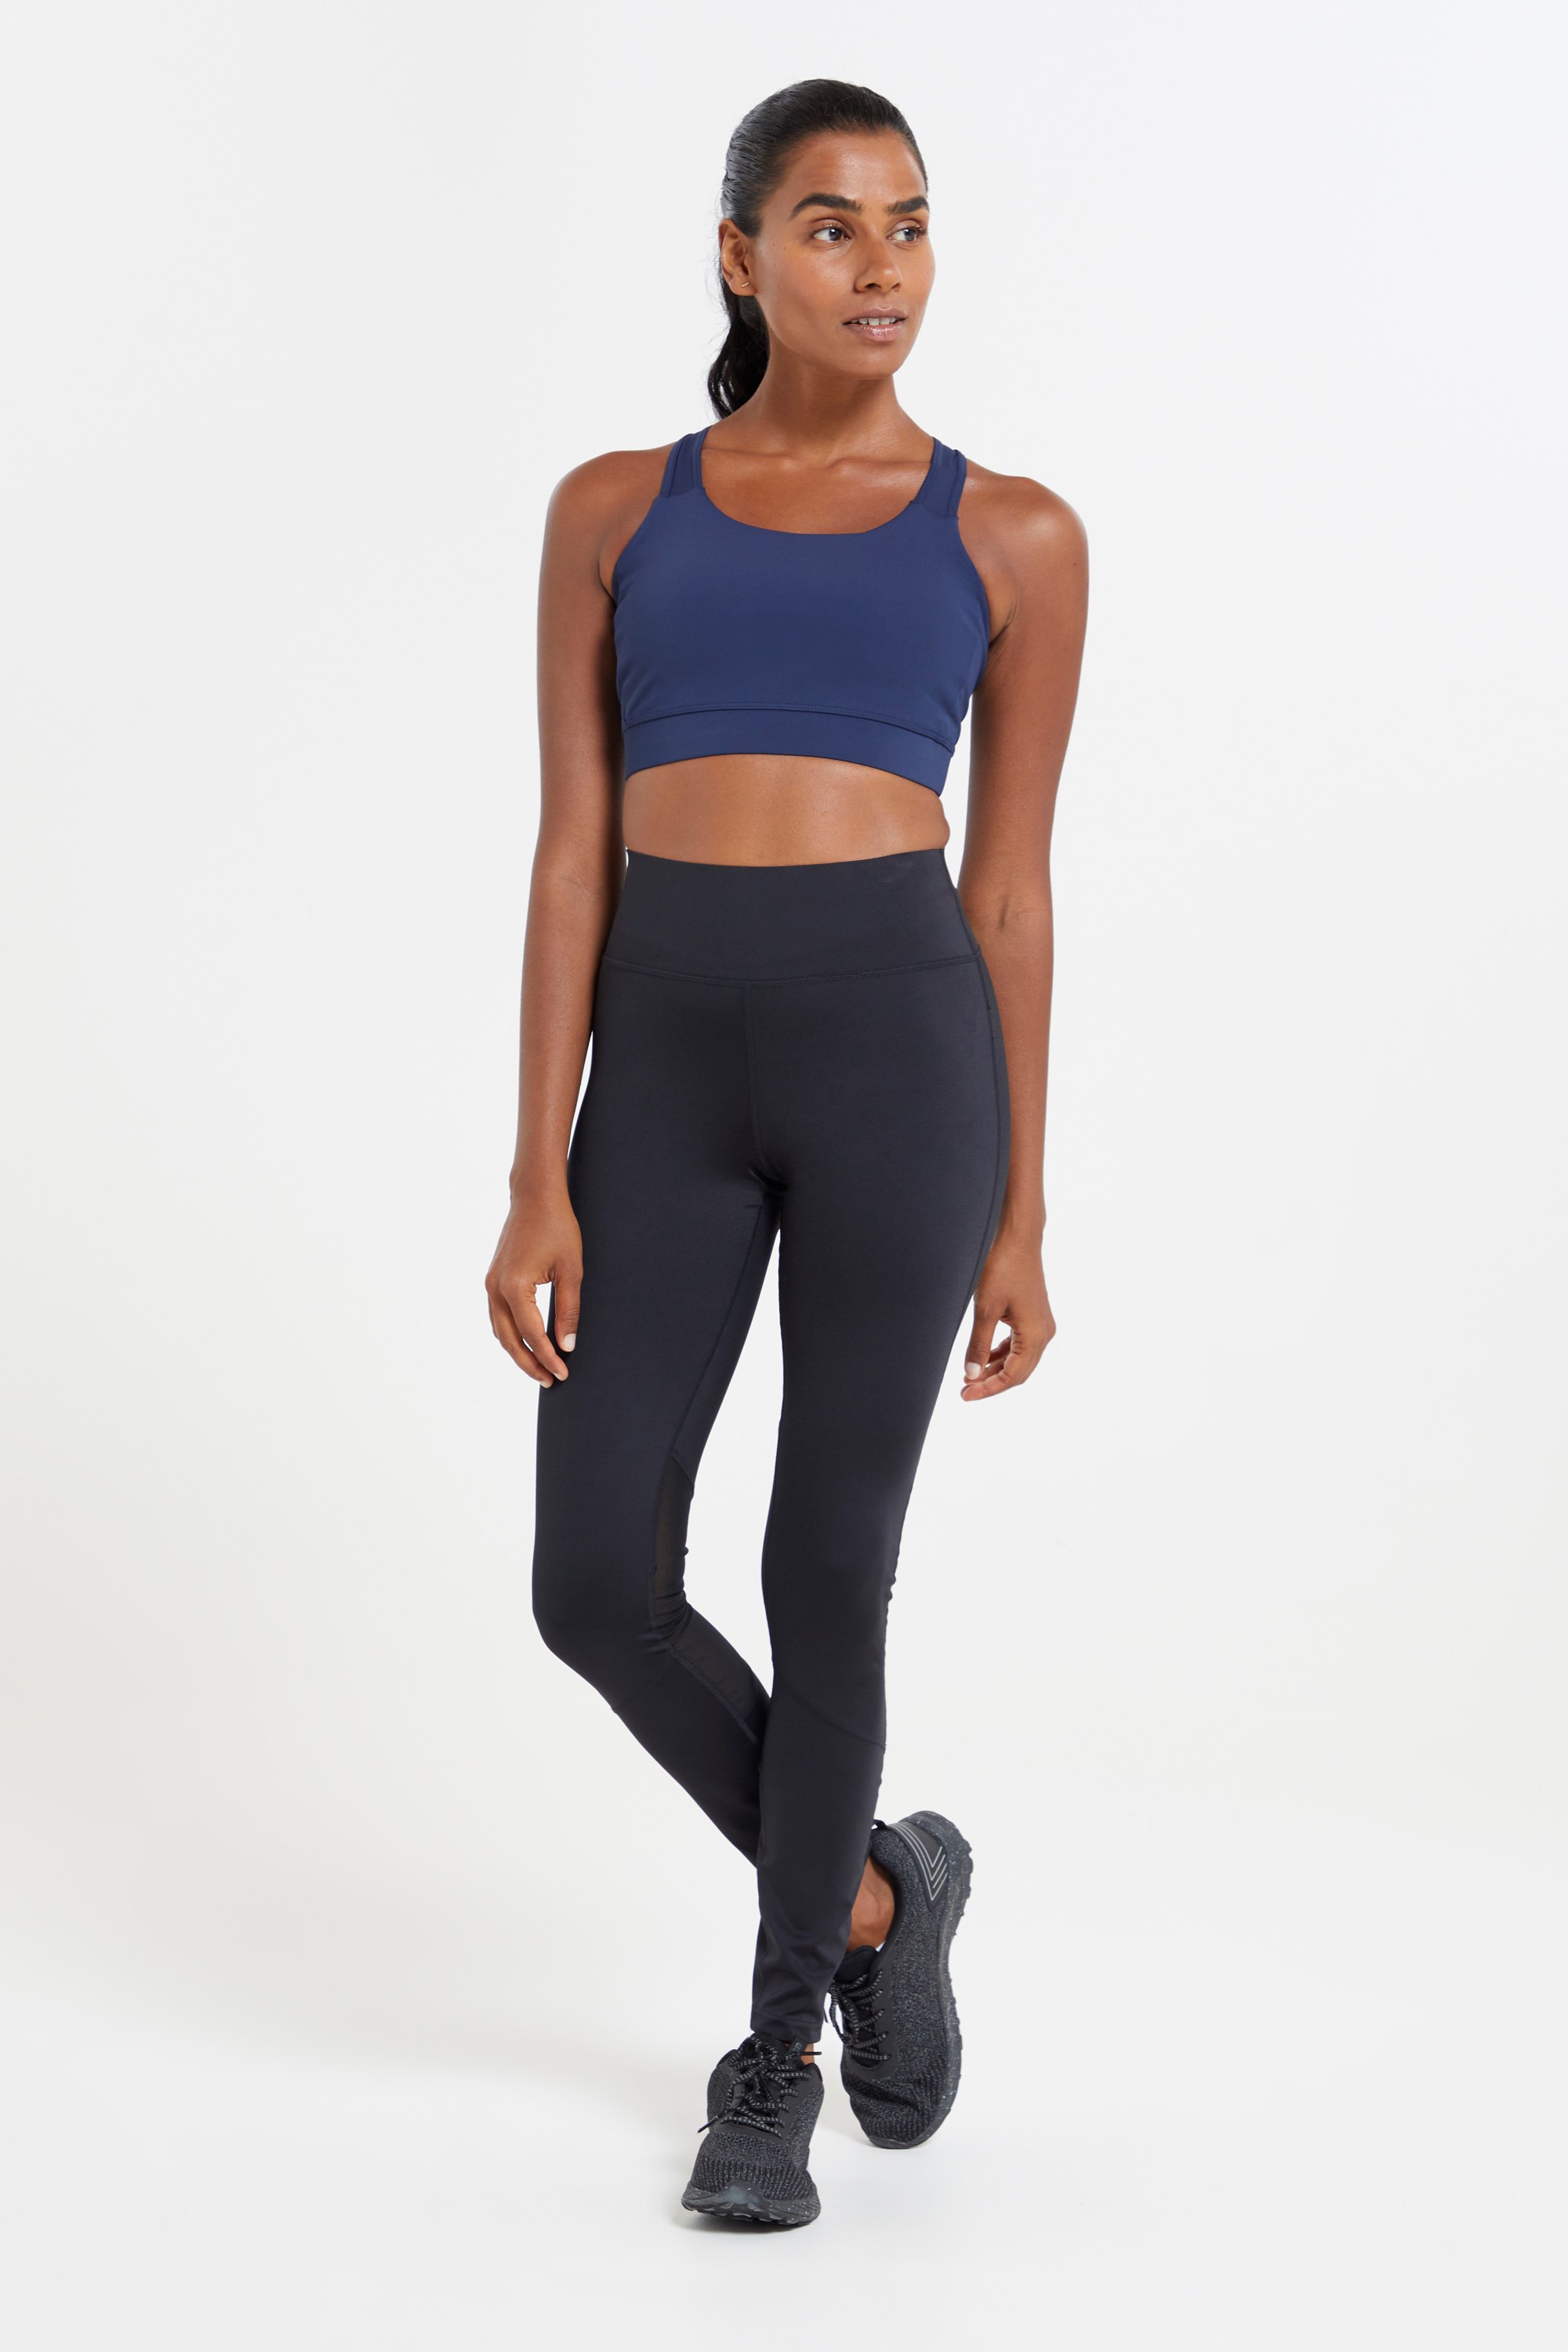 Workout & Sports Leggings, Running Tights